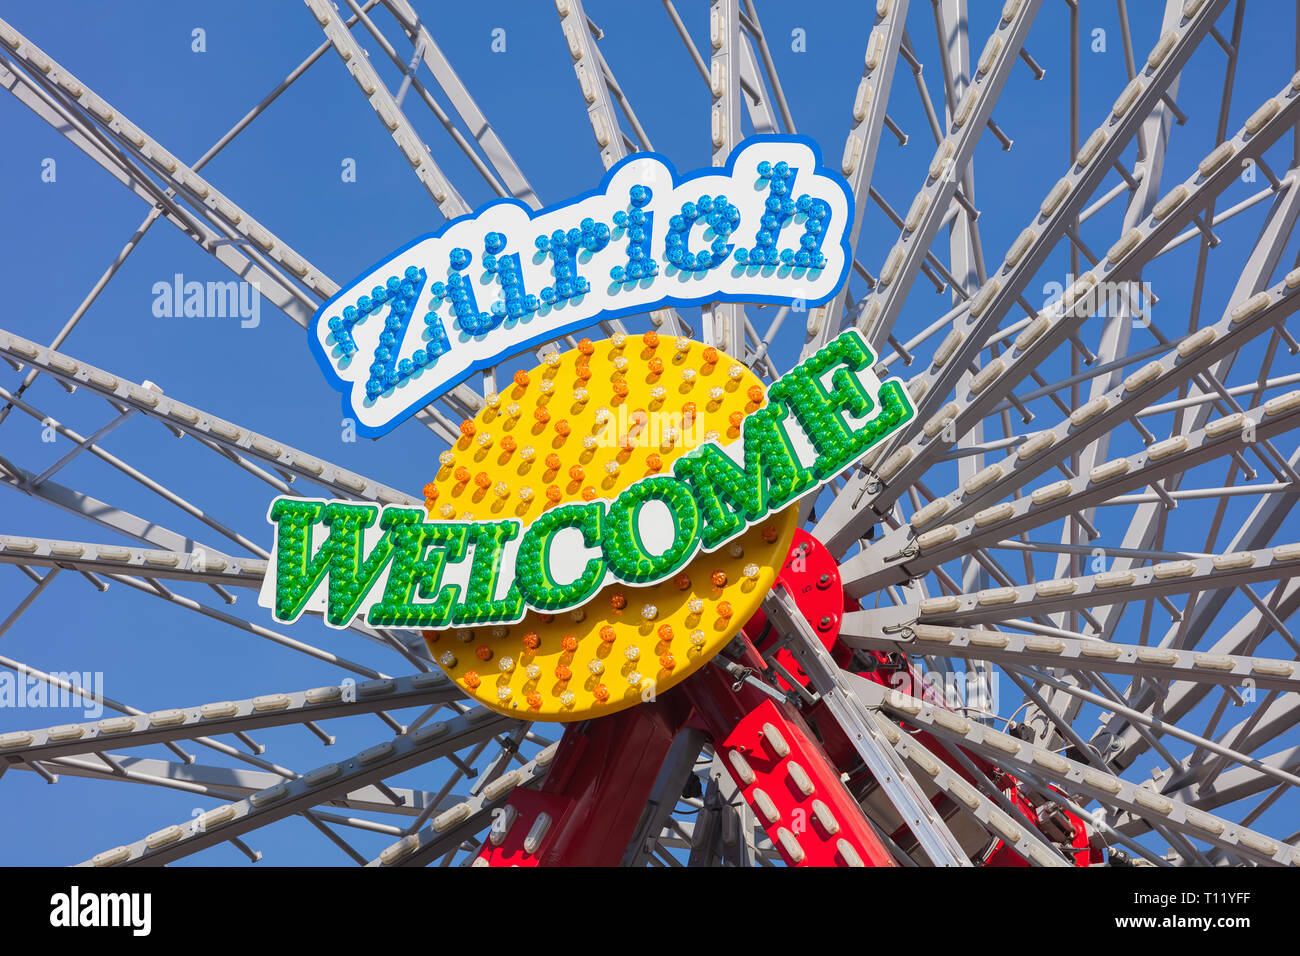 Zurich, Switzerland - March 22, 2019: the central part of a ferris wheel bearing a 'Zurich Welcome' sign. Zurich is the largest city in Switzerland an Stock Photo